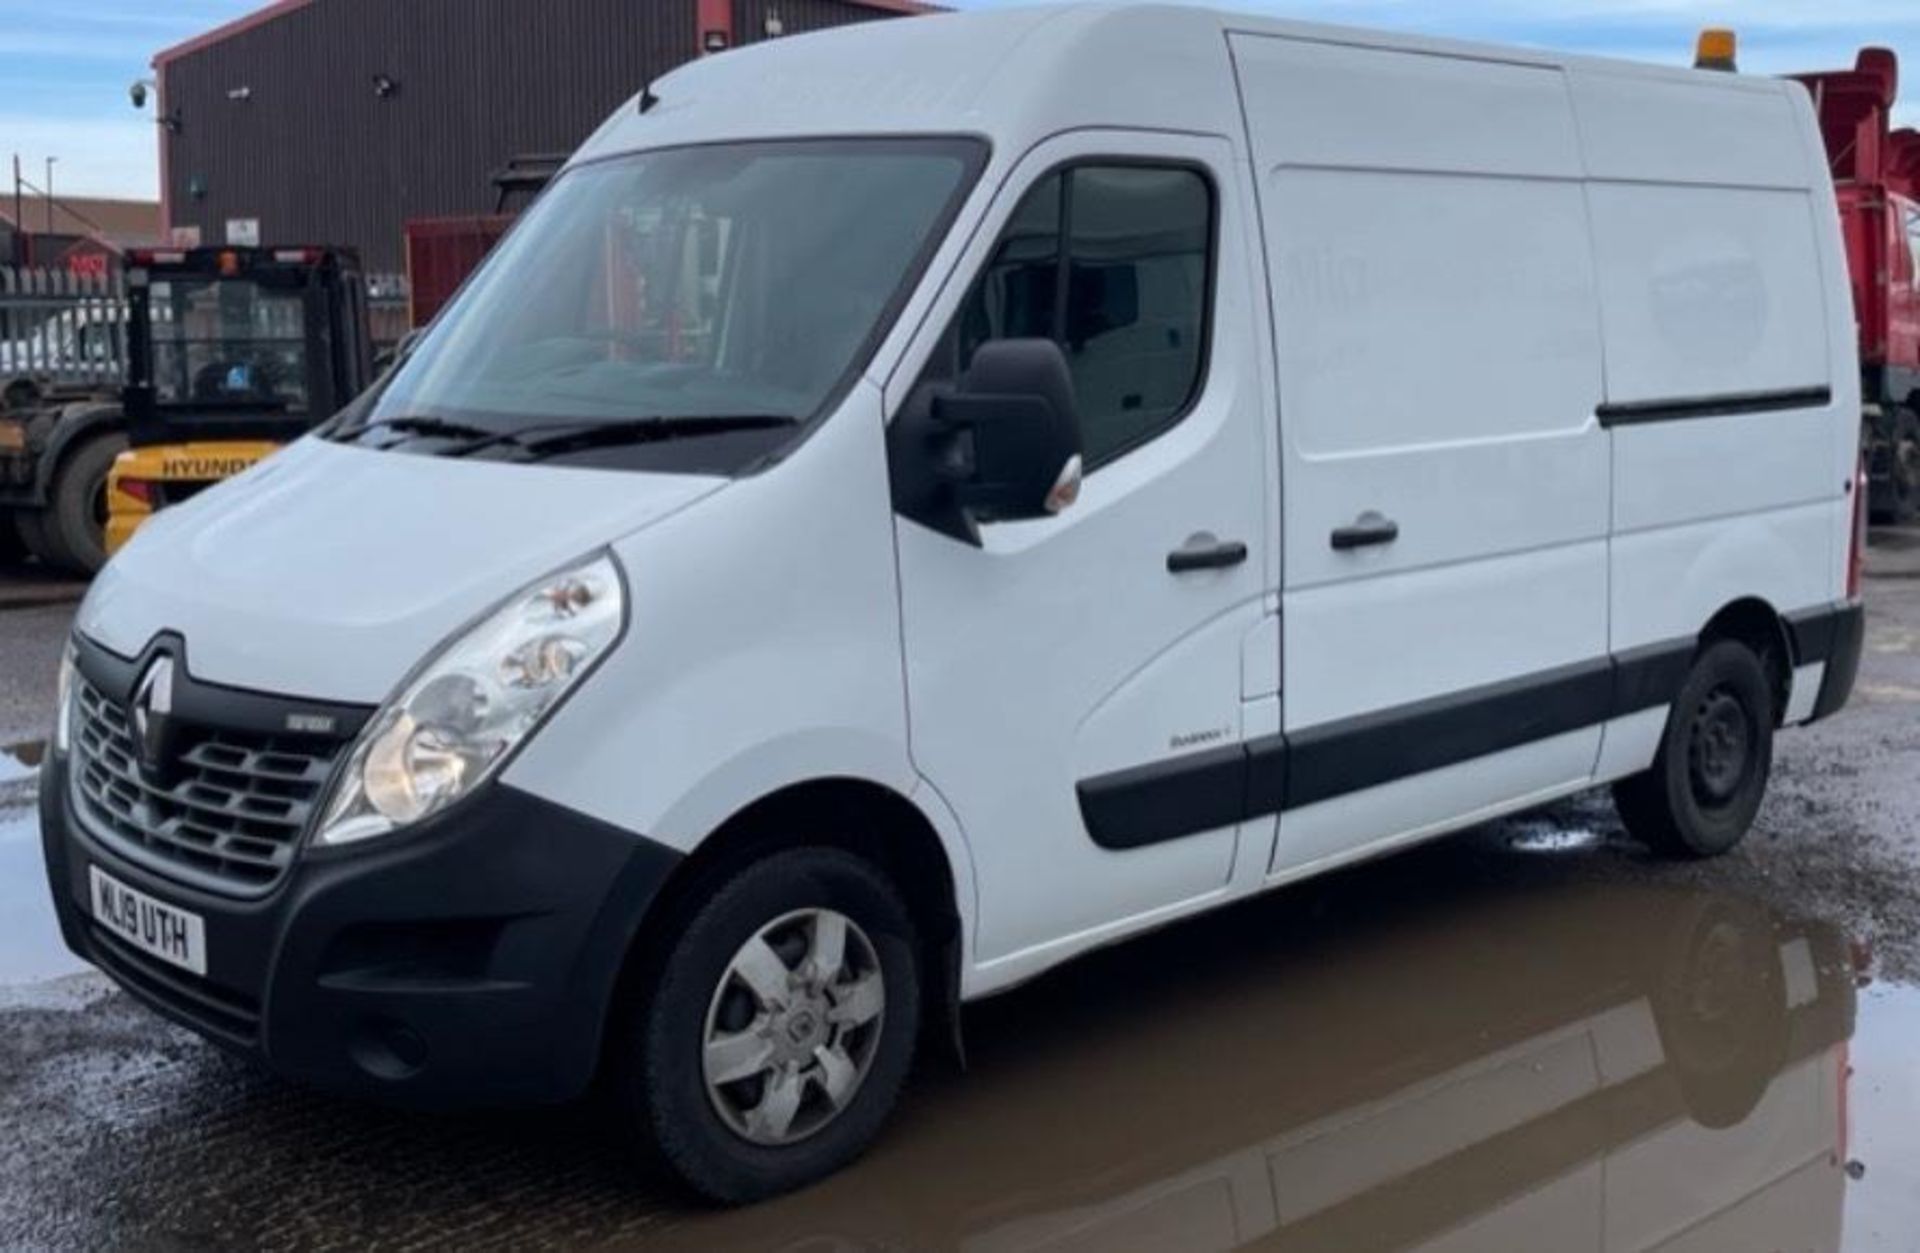 2019 RENAULT MASTER- 207K MILES- HPI CLEAR - READY TO GO!